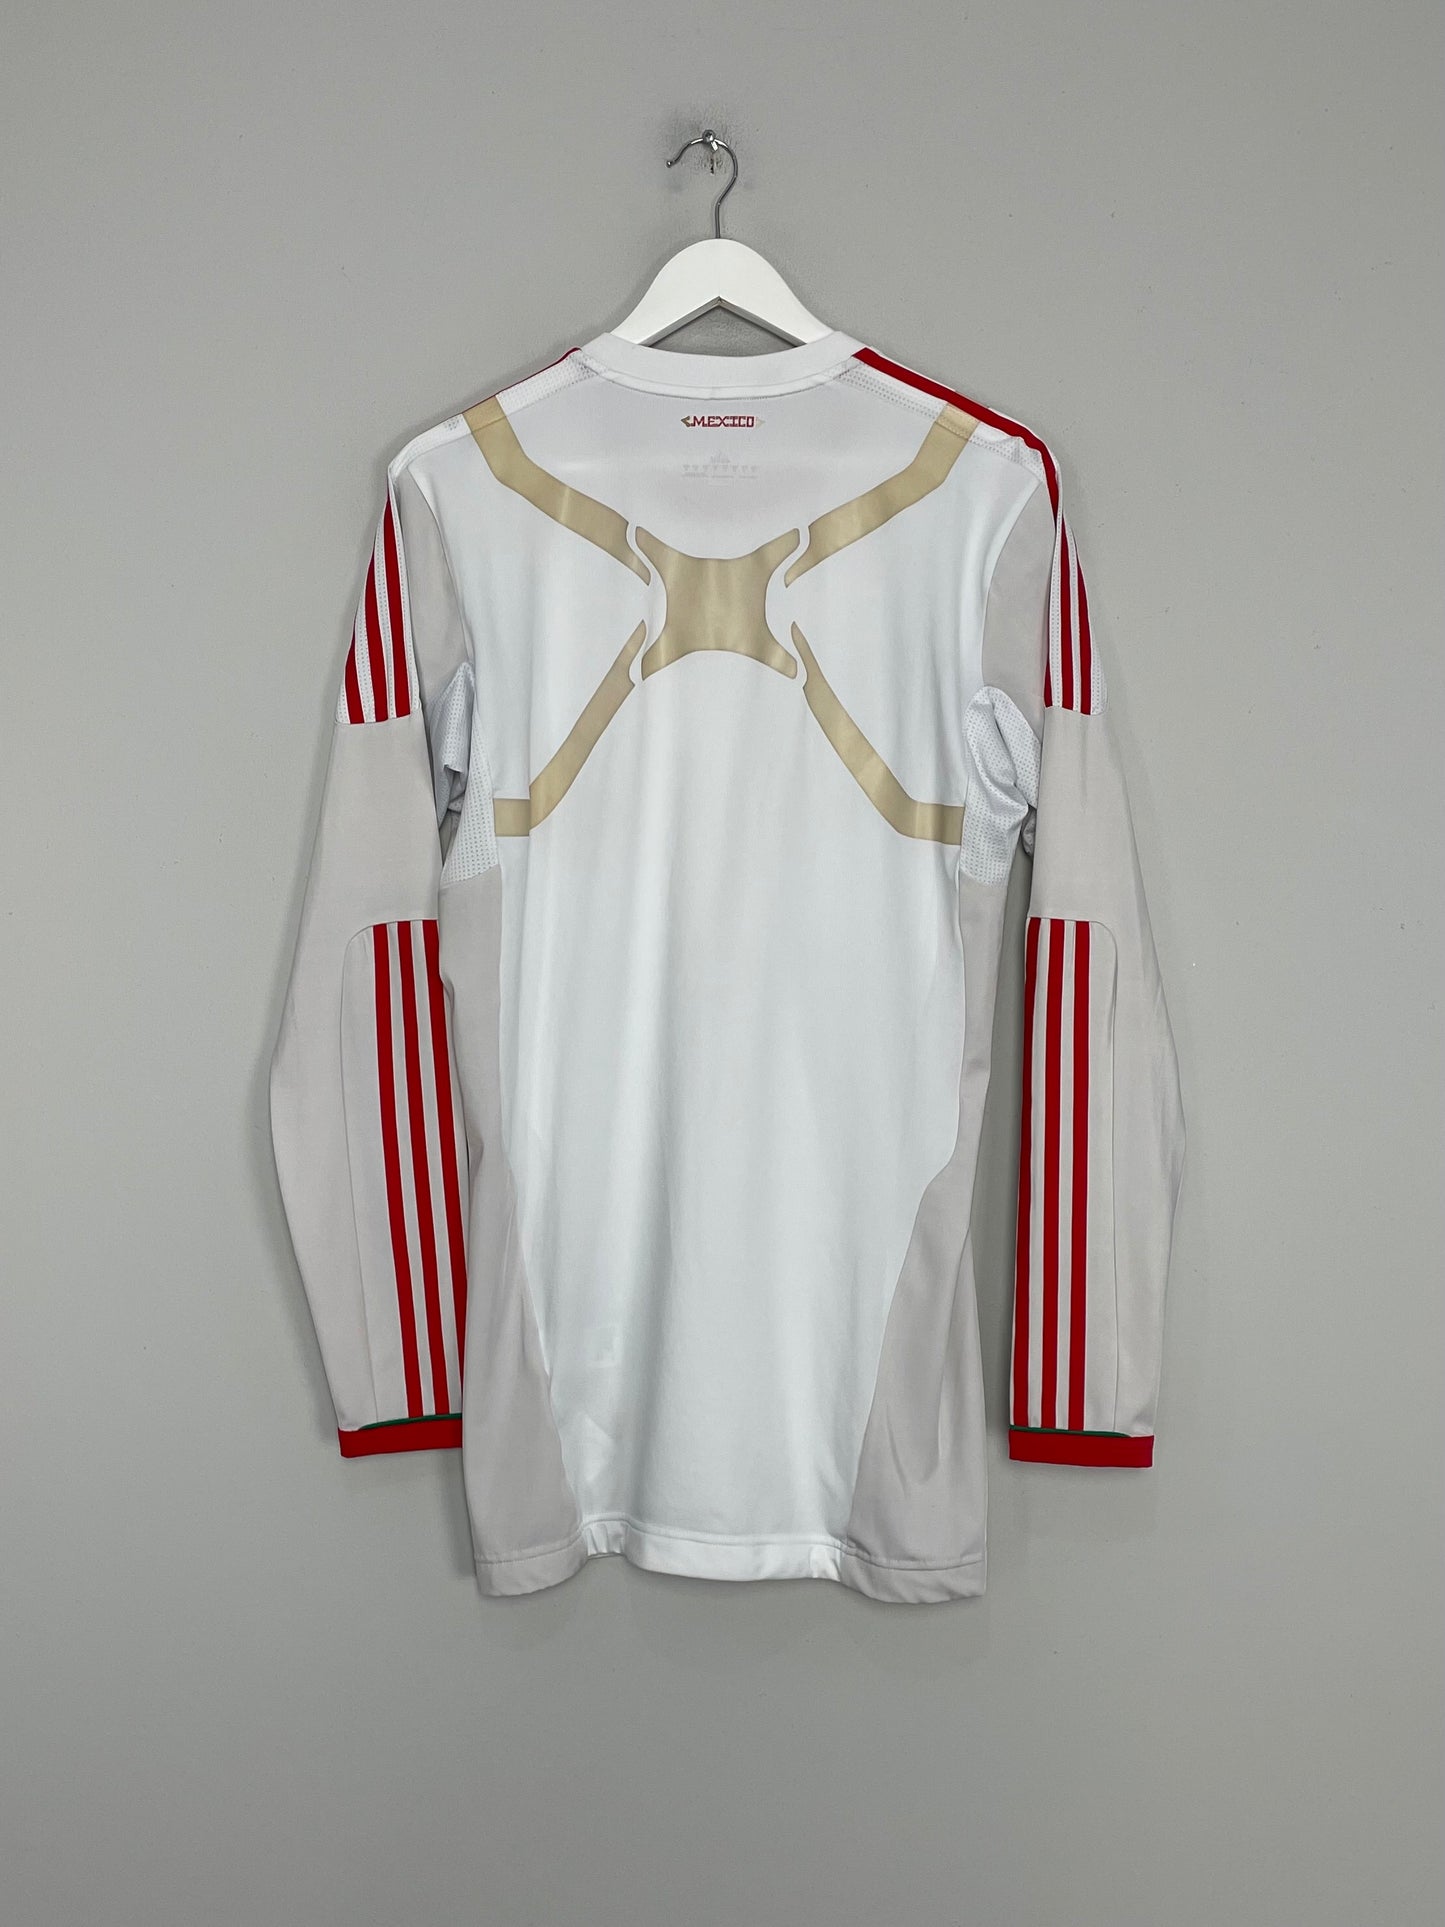 2010/11 MEXICO *PLAYER ISSUE* L/S AWAY SHIRT (M) ADIDAS